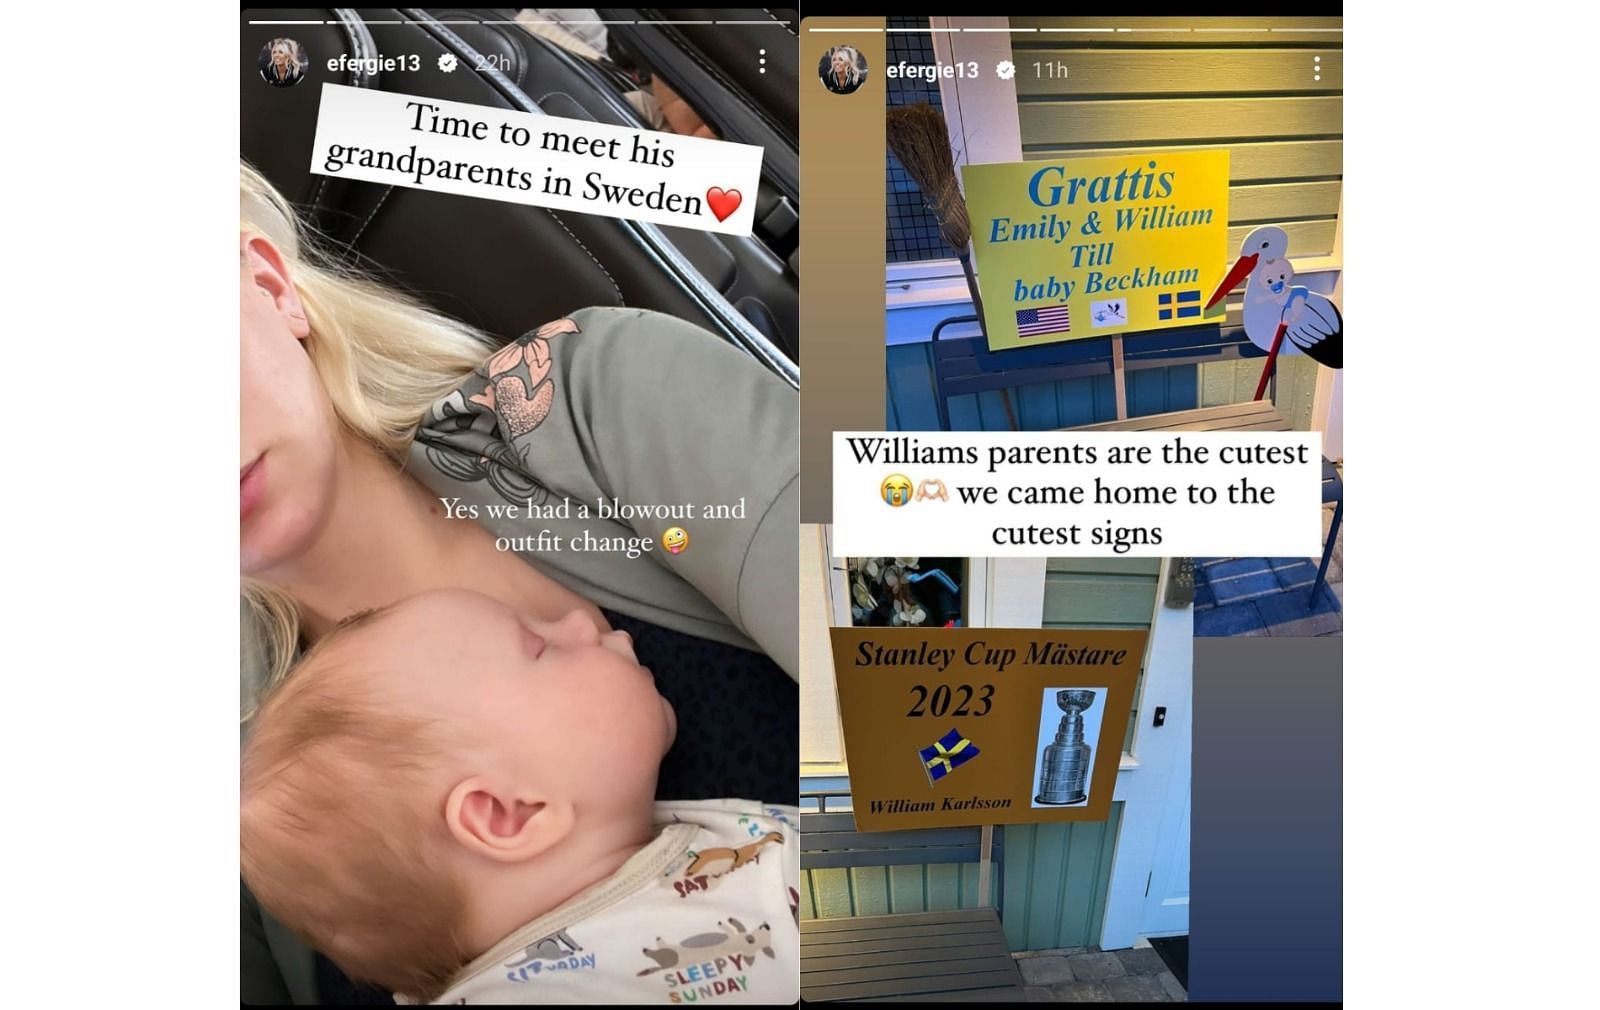 William Karlsson and family share adorable post-season vacation pics from Sweden